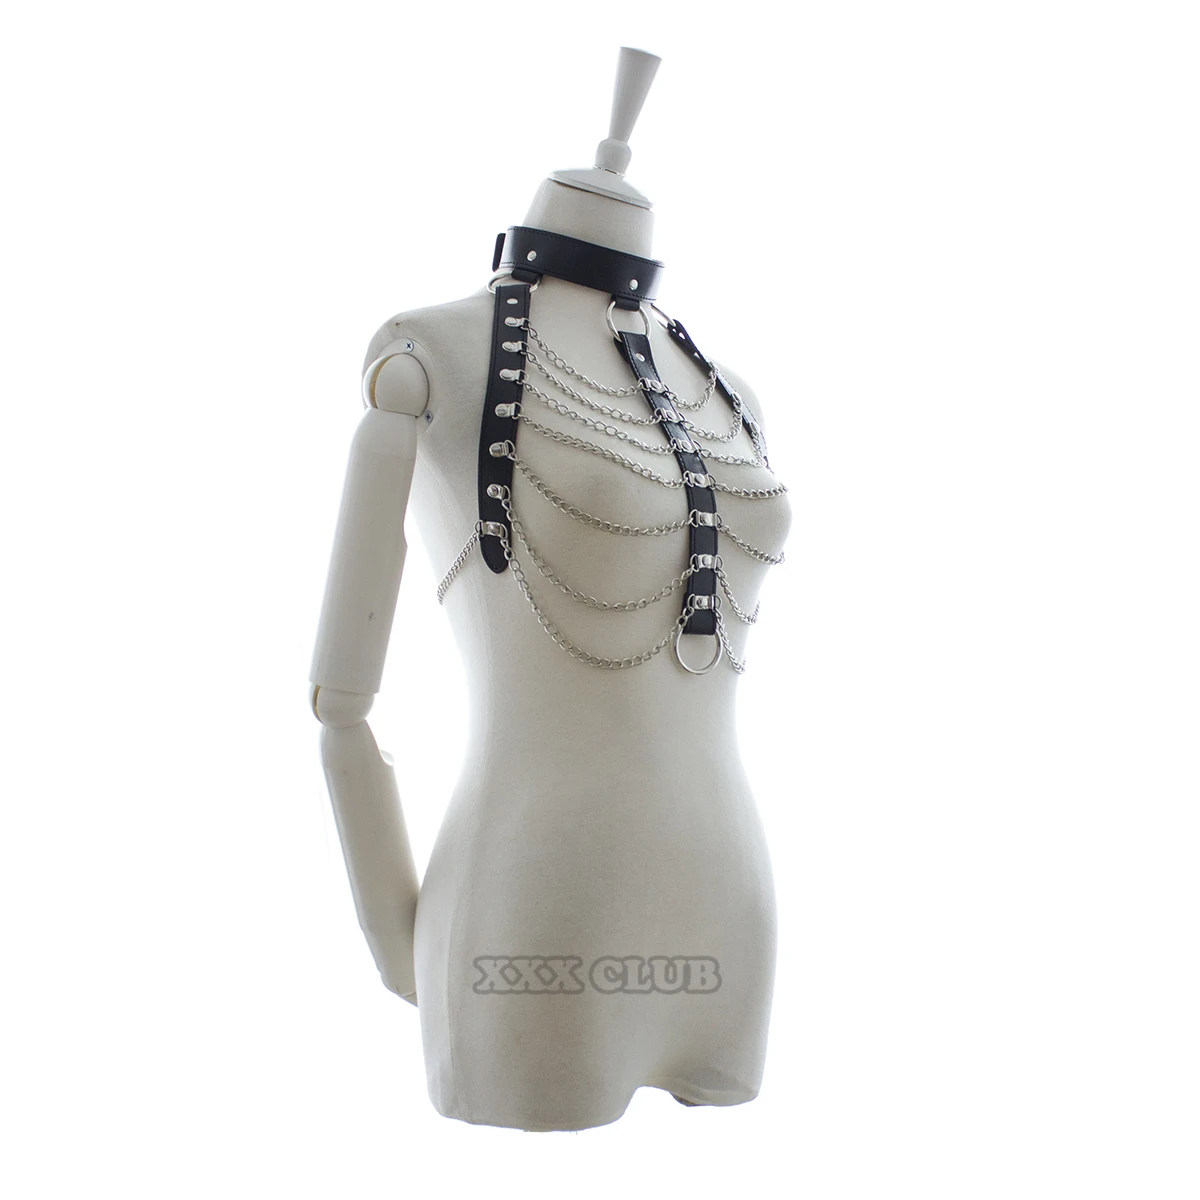 Thierry Female Bondage Harness Sex Flirtation Include Collar and Metal Chain, Sex Toys For Women Adult Couples Game picture